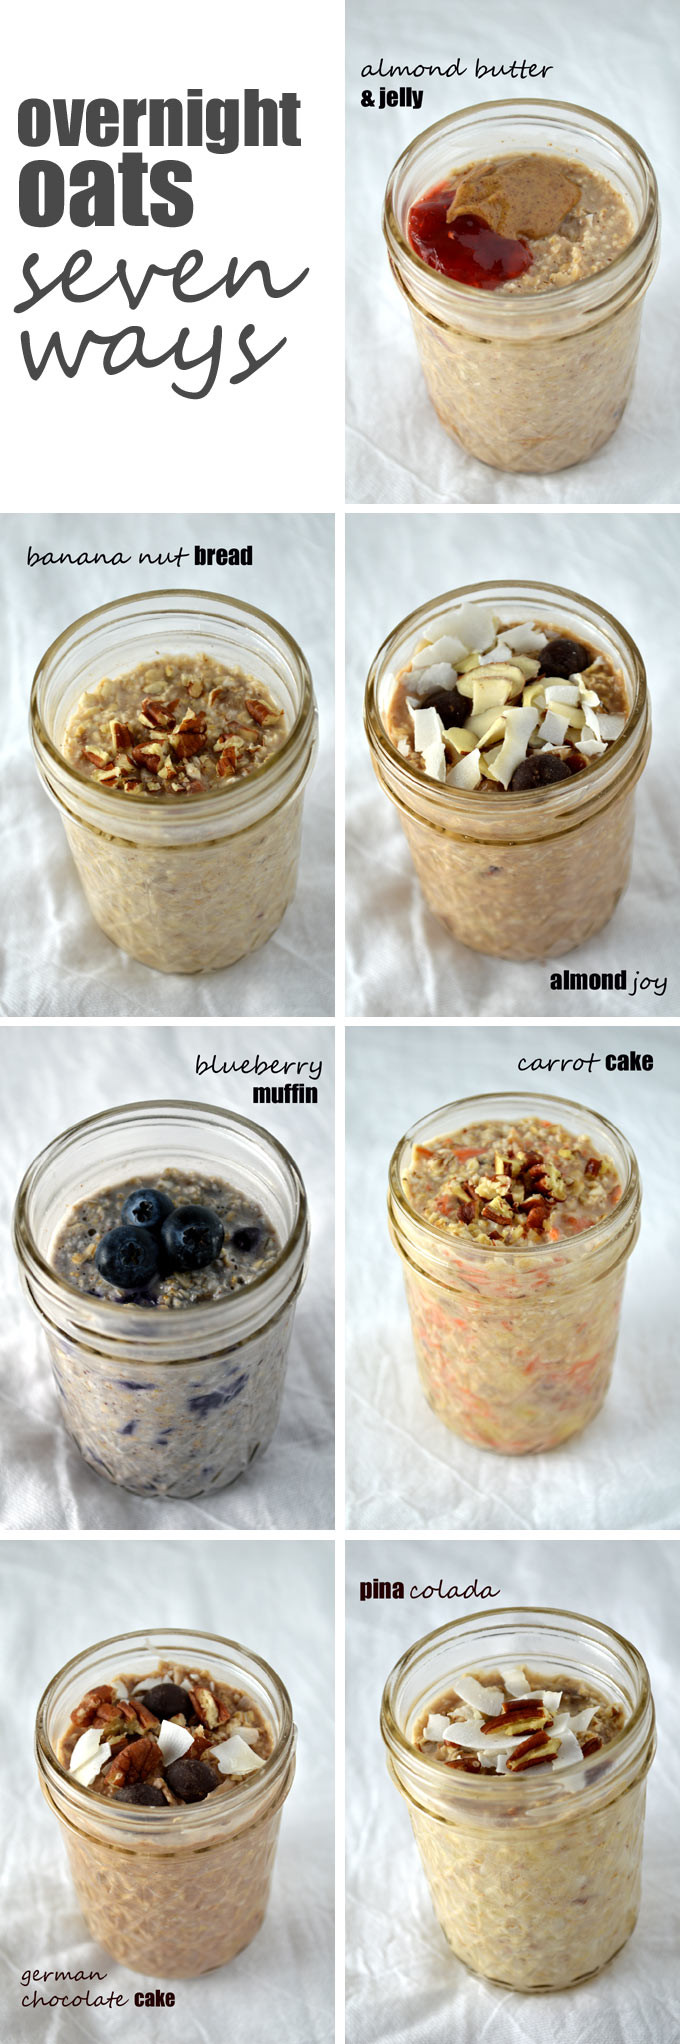 Healthy Overnight Oats Recipes
 Overnight Oats Seven Ways Another Root